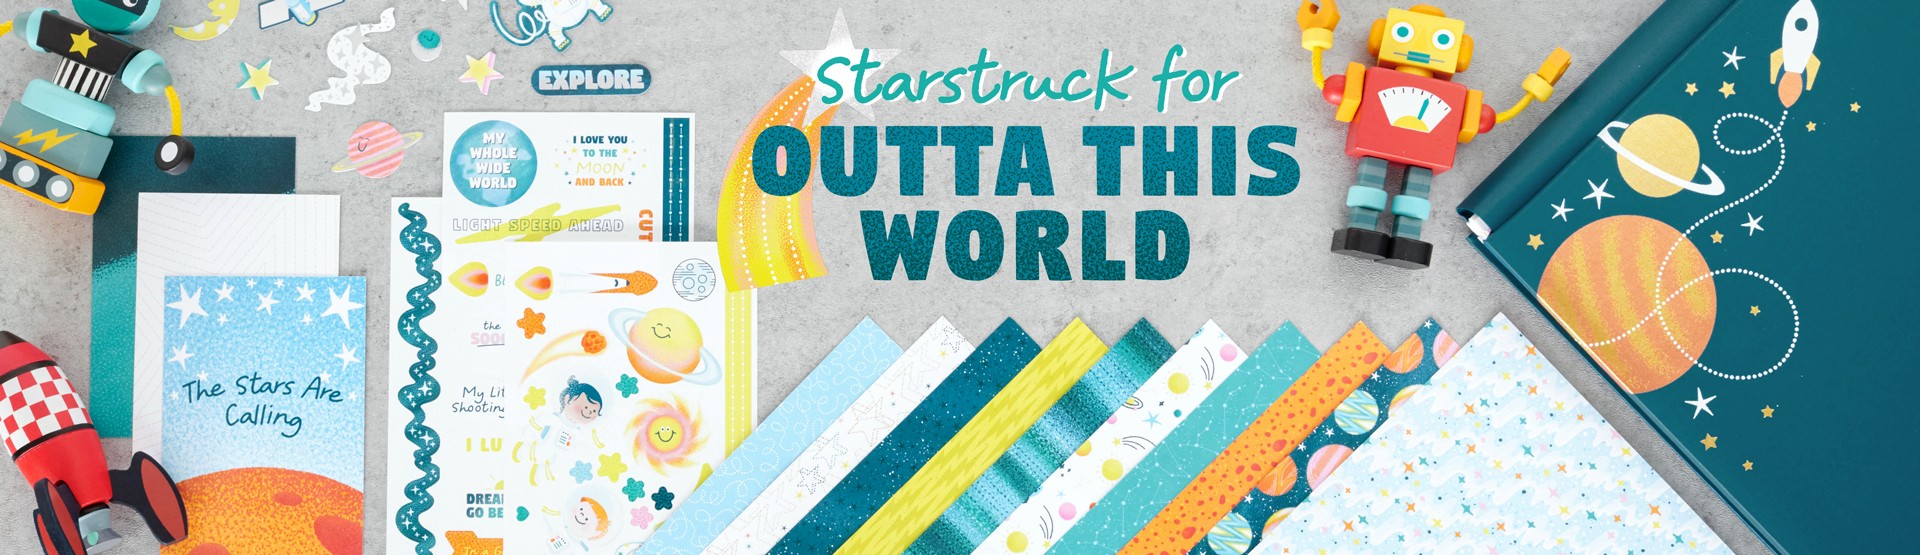 Outer Space Scrapbooking Supplies: Outta This World